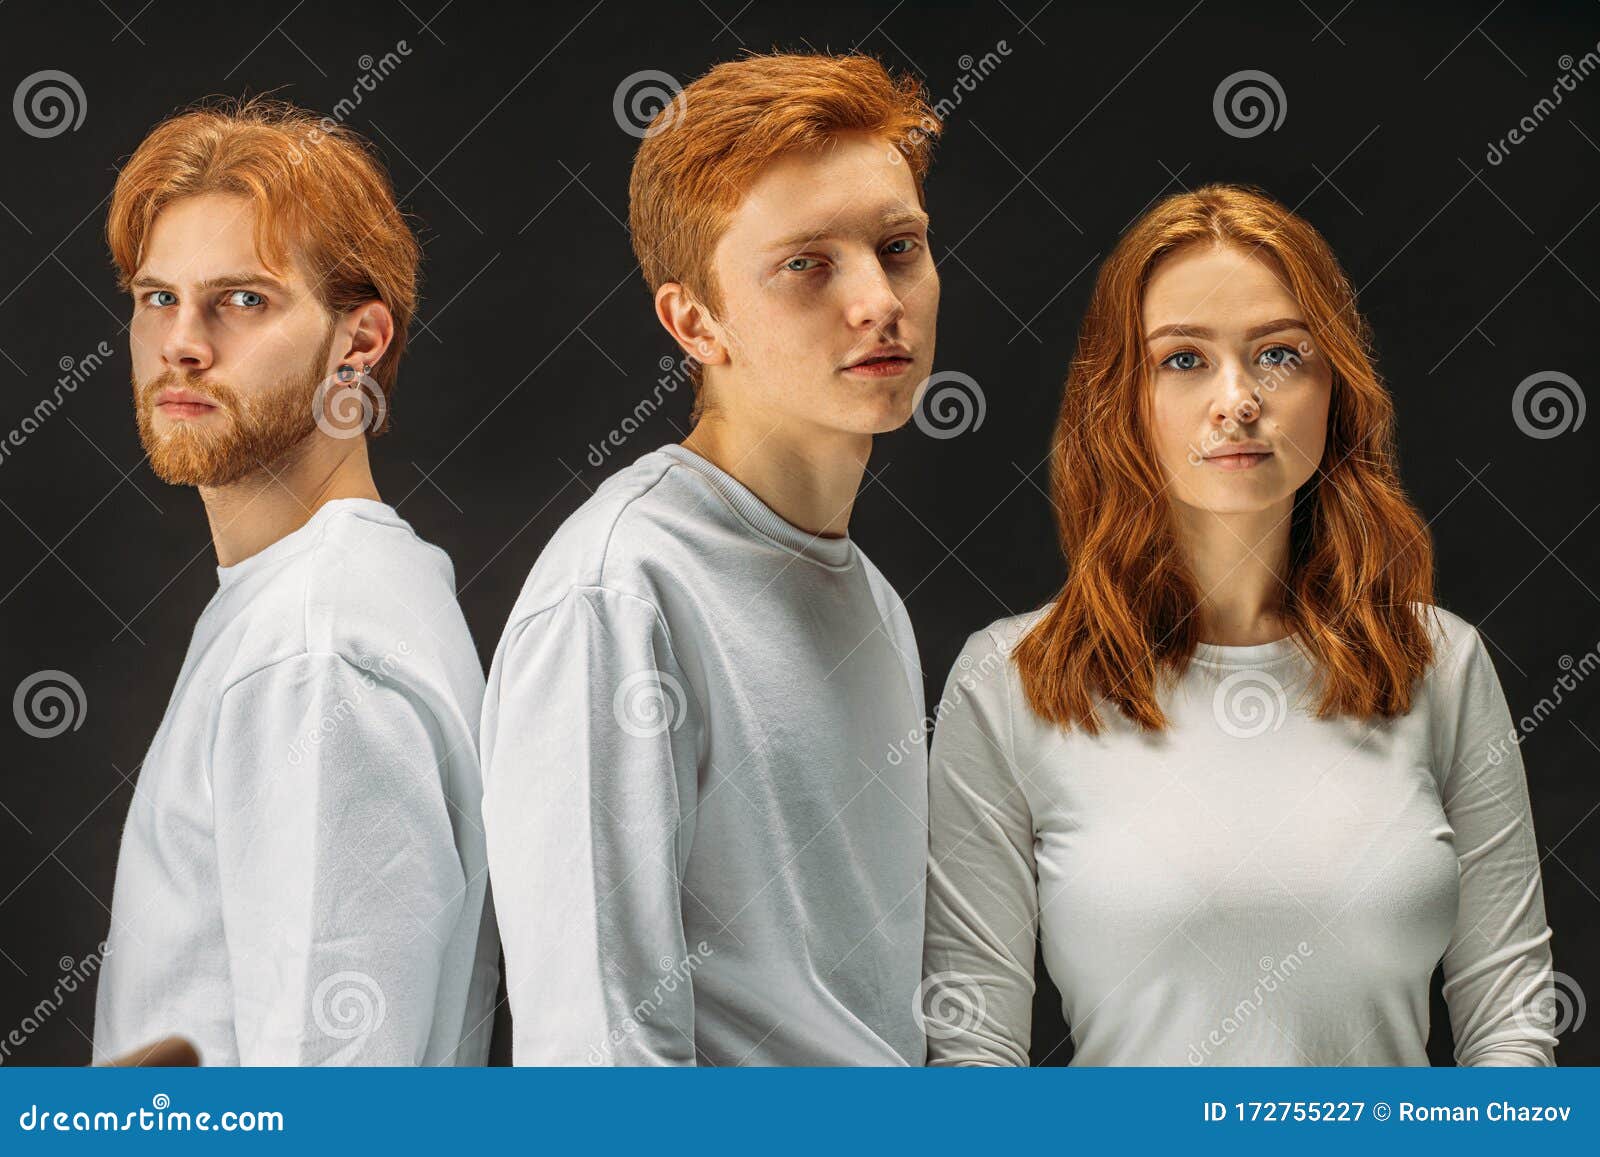 Redhead Day Rare Type Of People With Natural Red Hair Stock Image Image Of Family Redhead 172755227